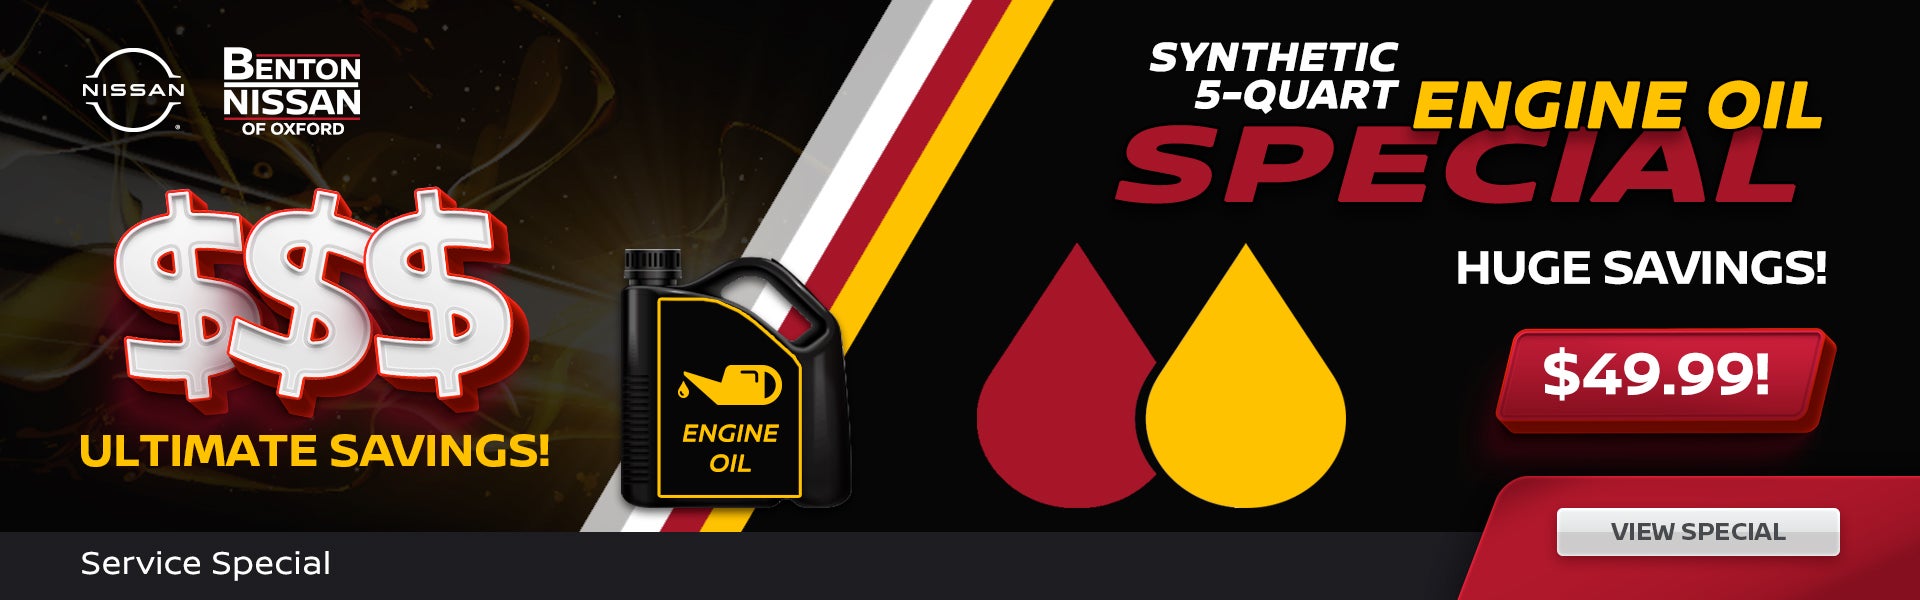 Synthetic 5-Quart Engine Oil Special!